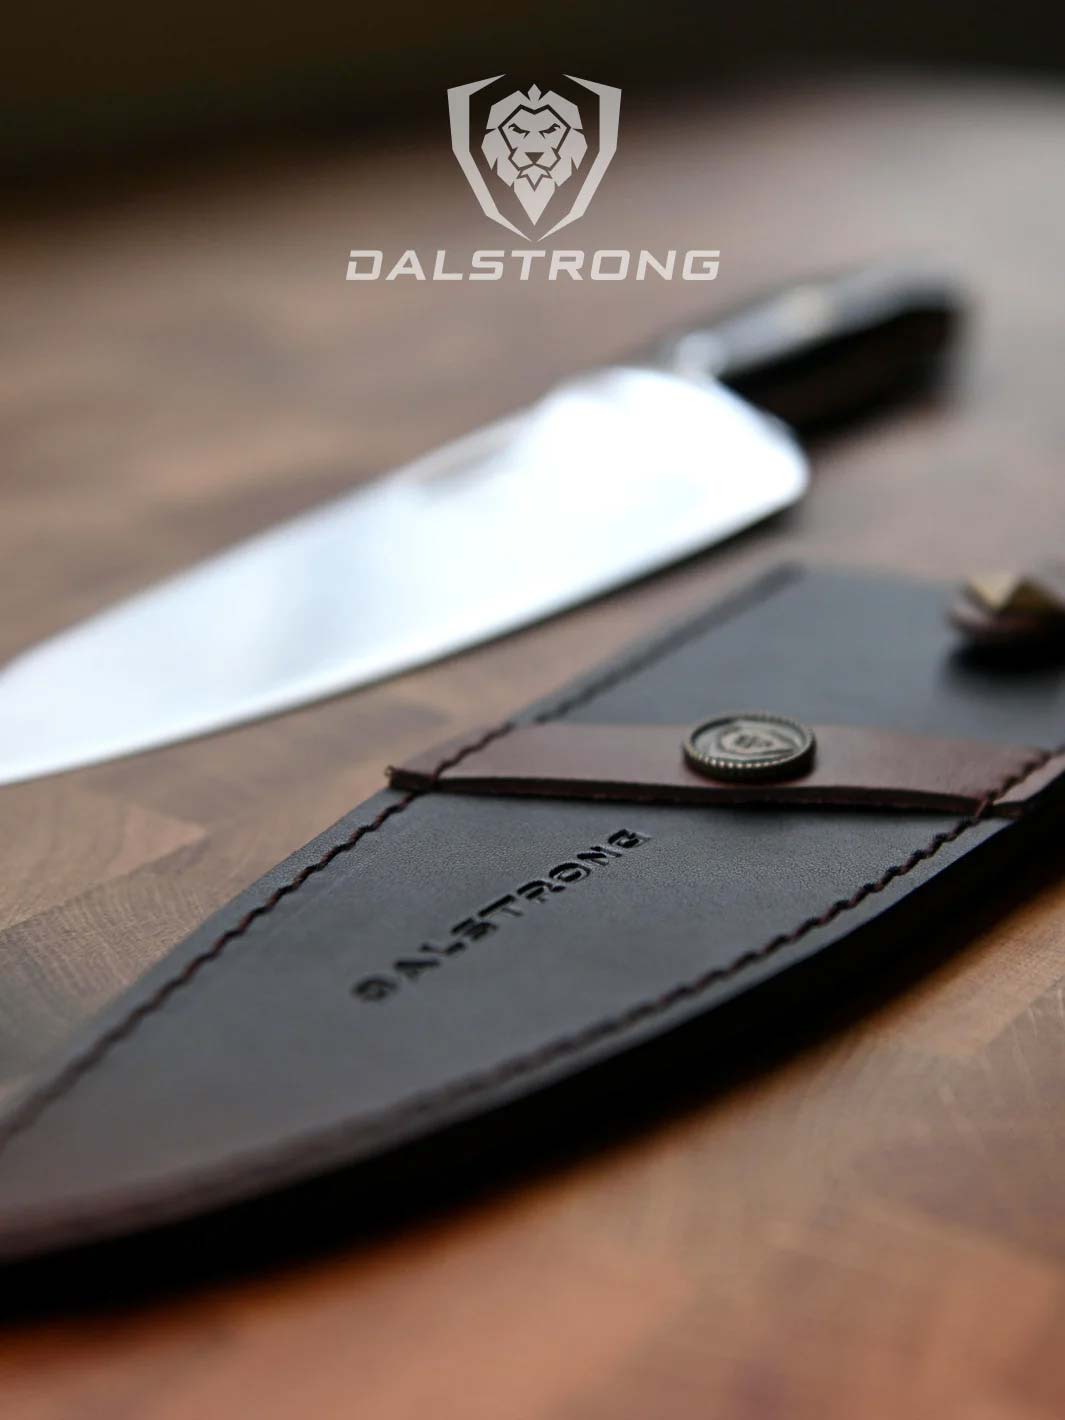 Dalstrong centurion series 8 inch chef knife beside it's black sheath.